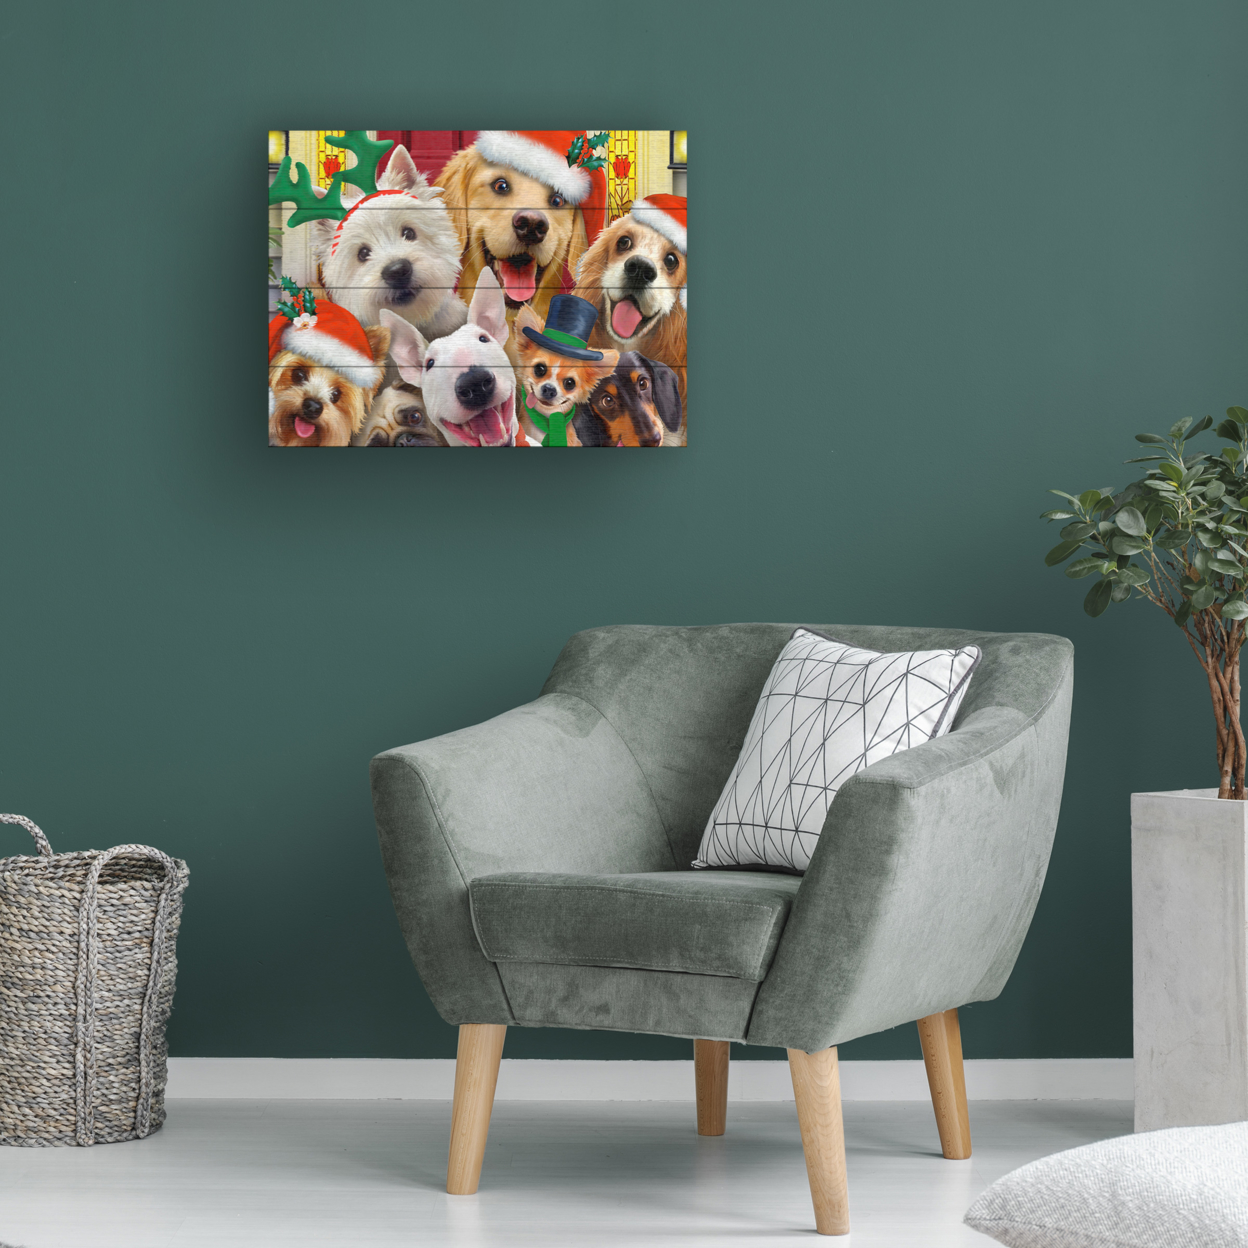 Wall Art 12 X 16 Inches Titled Christmas Dogs Ready To Hang Printed On Wooden Planks